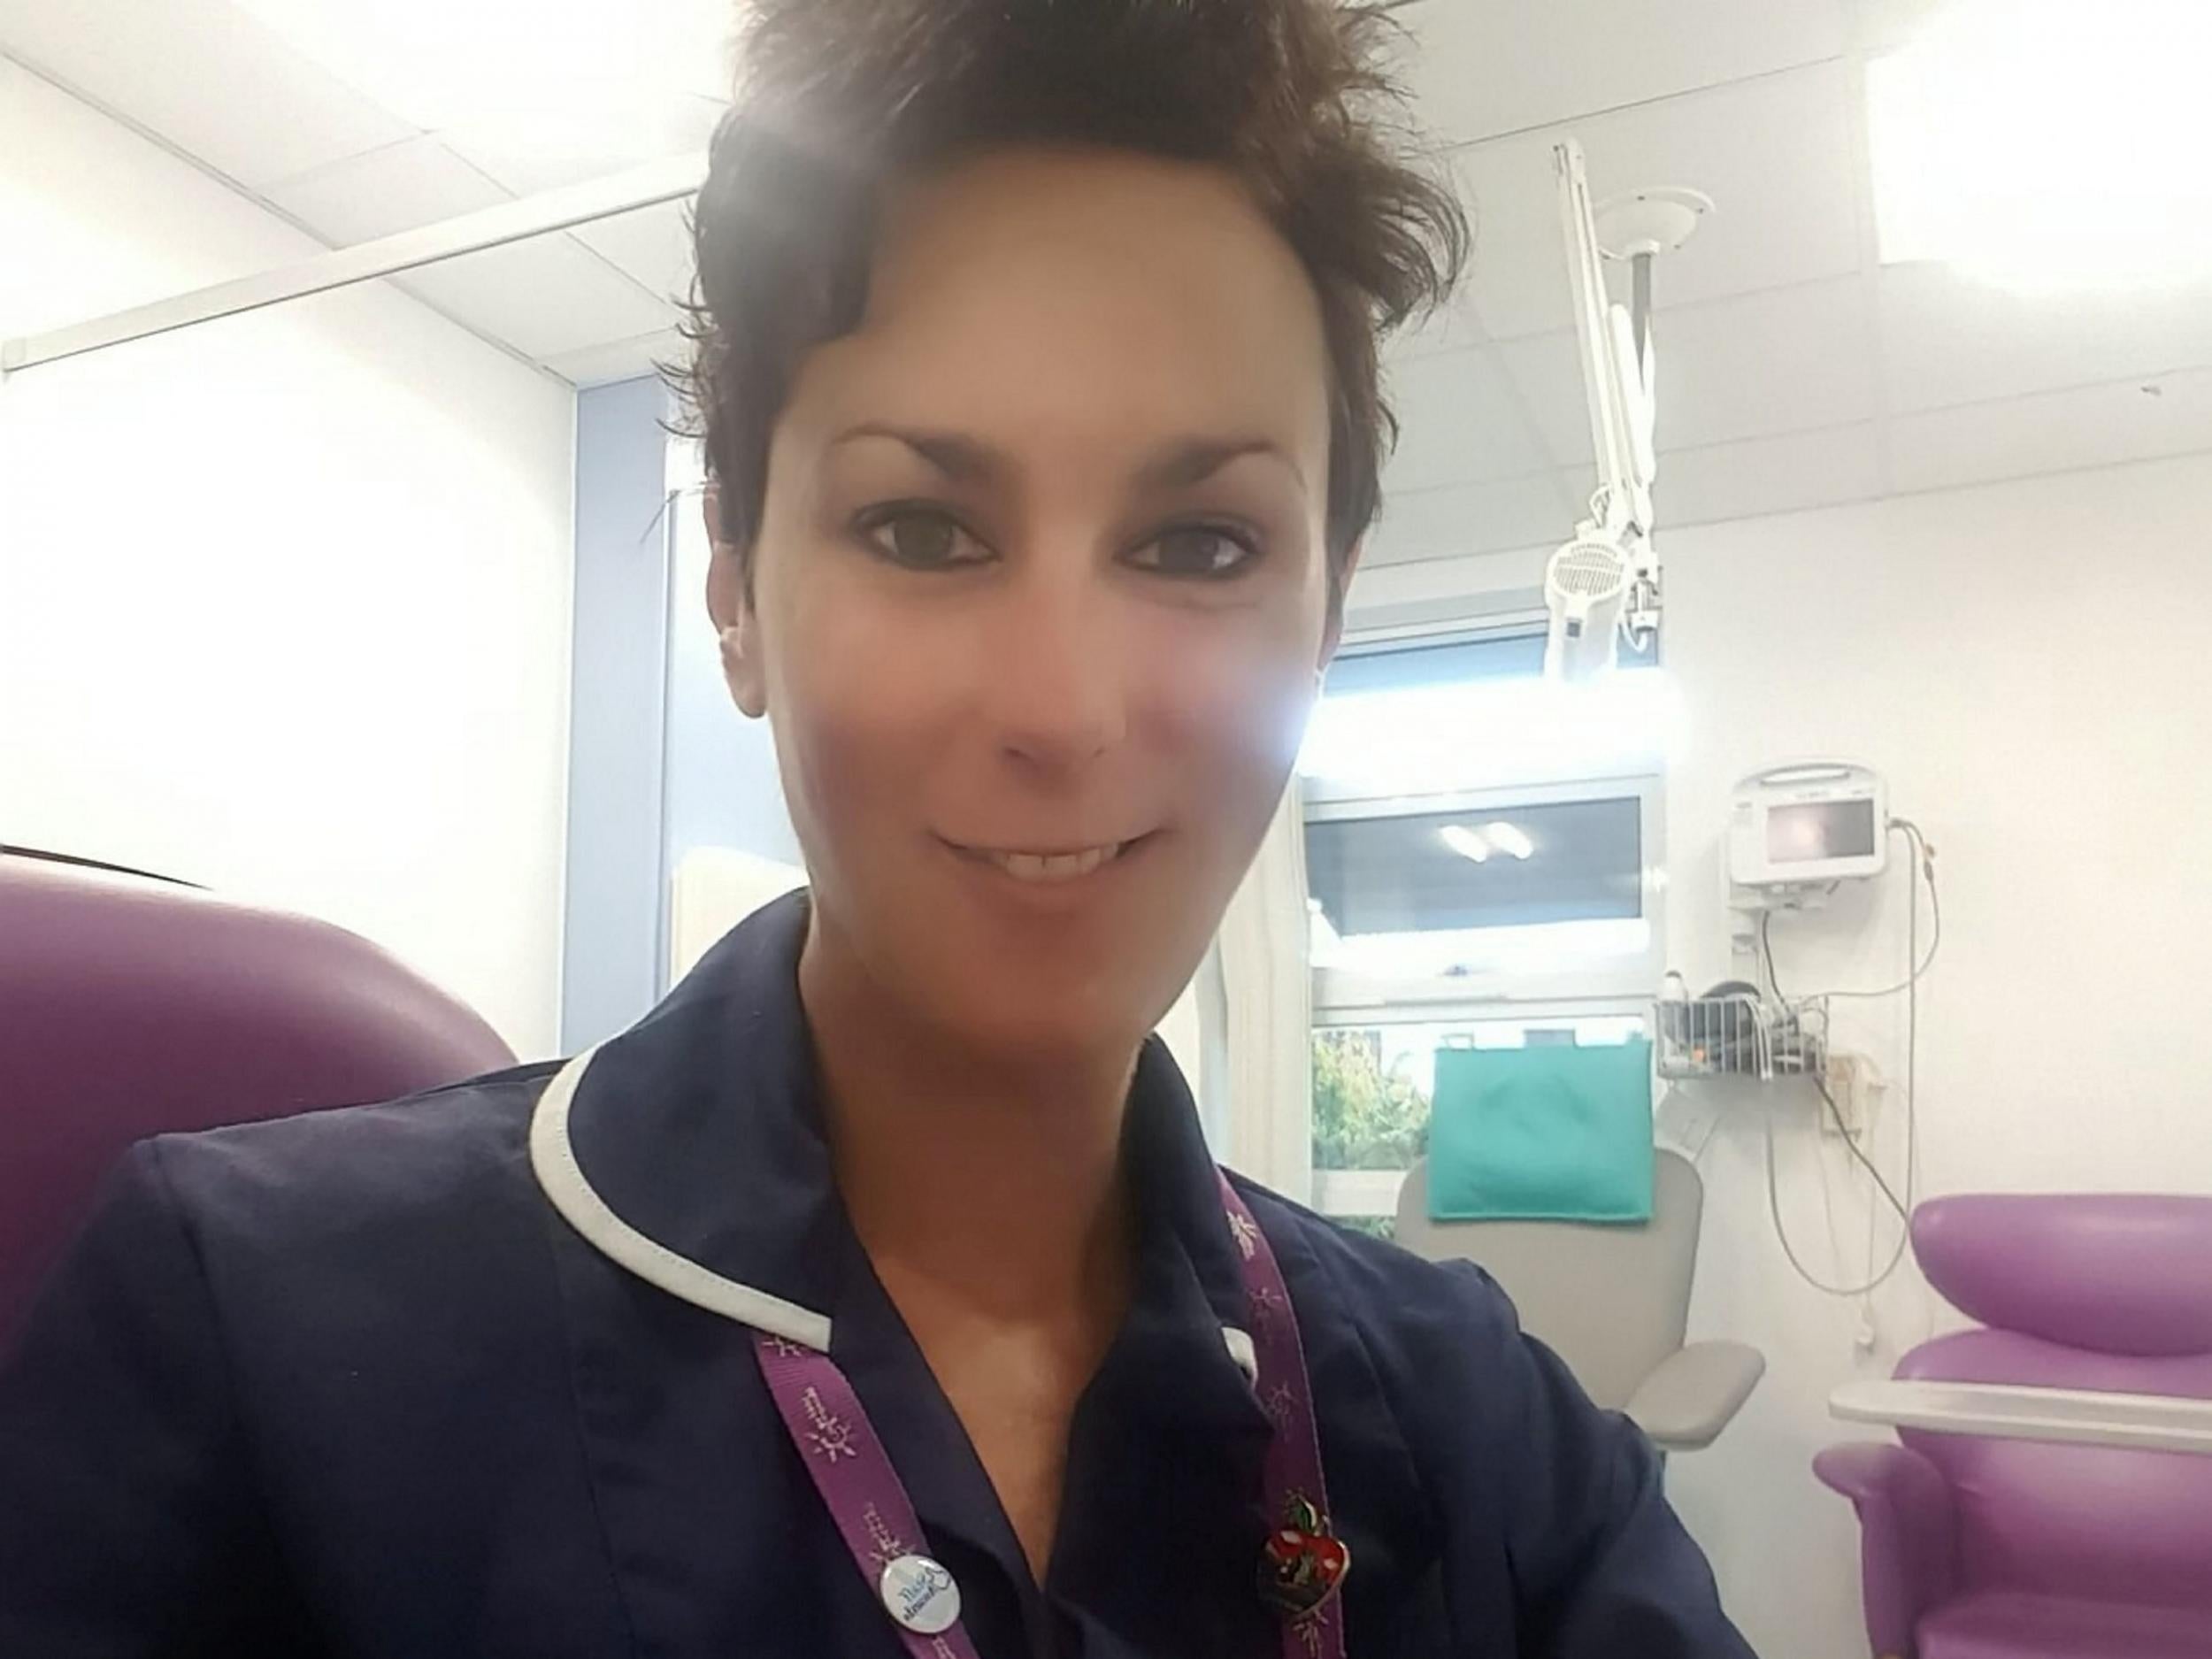 Laura Harris, who qualified as an oncology nurse 12 years ago, said she was feeling better after the treatment